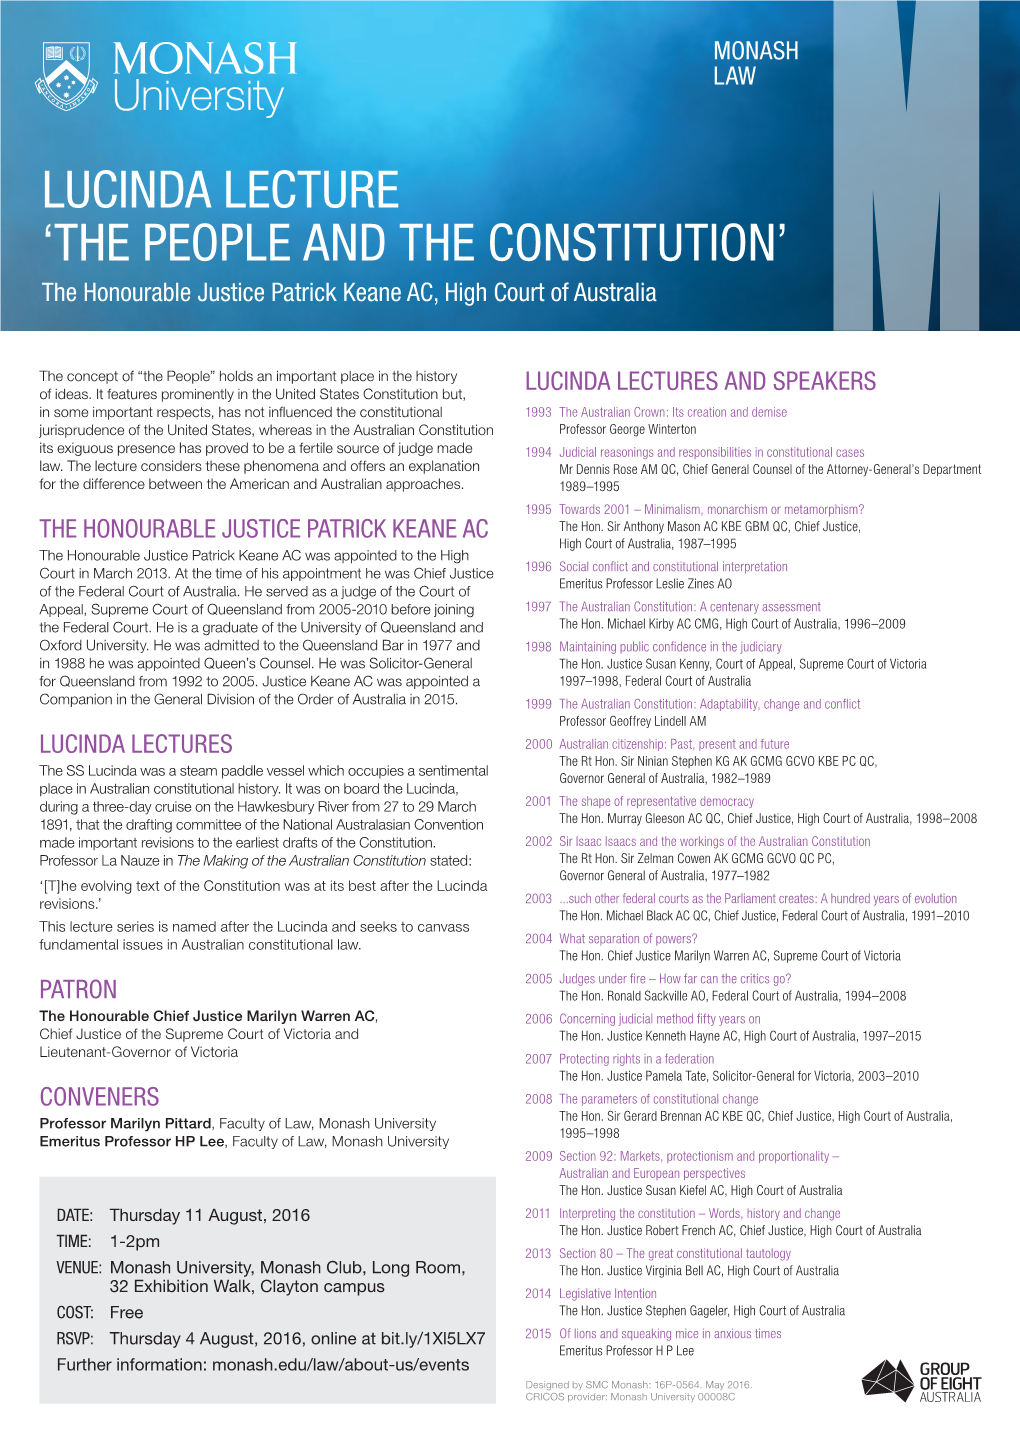 Lucinda Lecture 'The People and the Constitution'